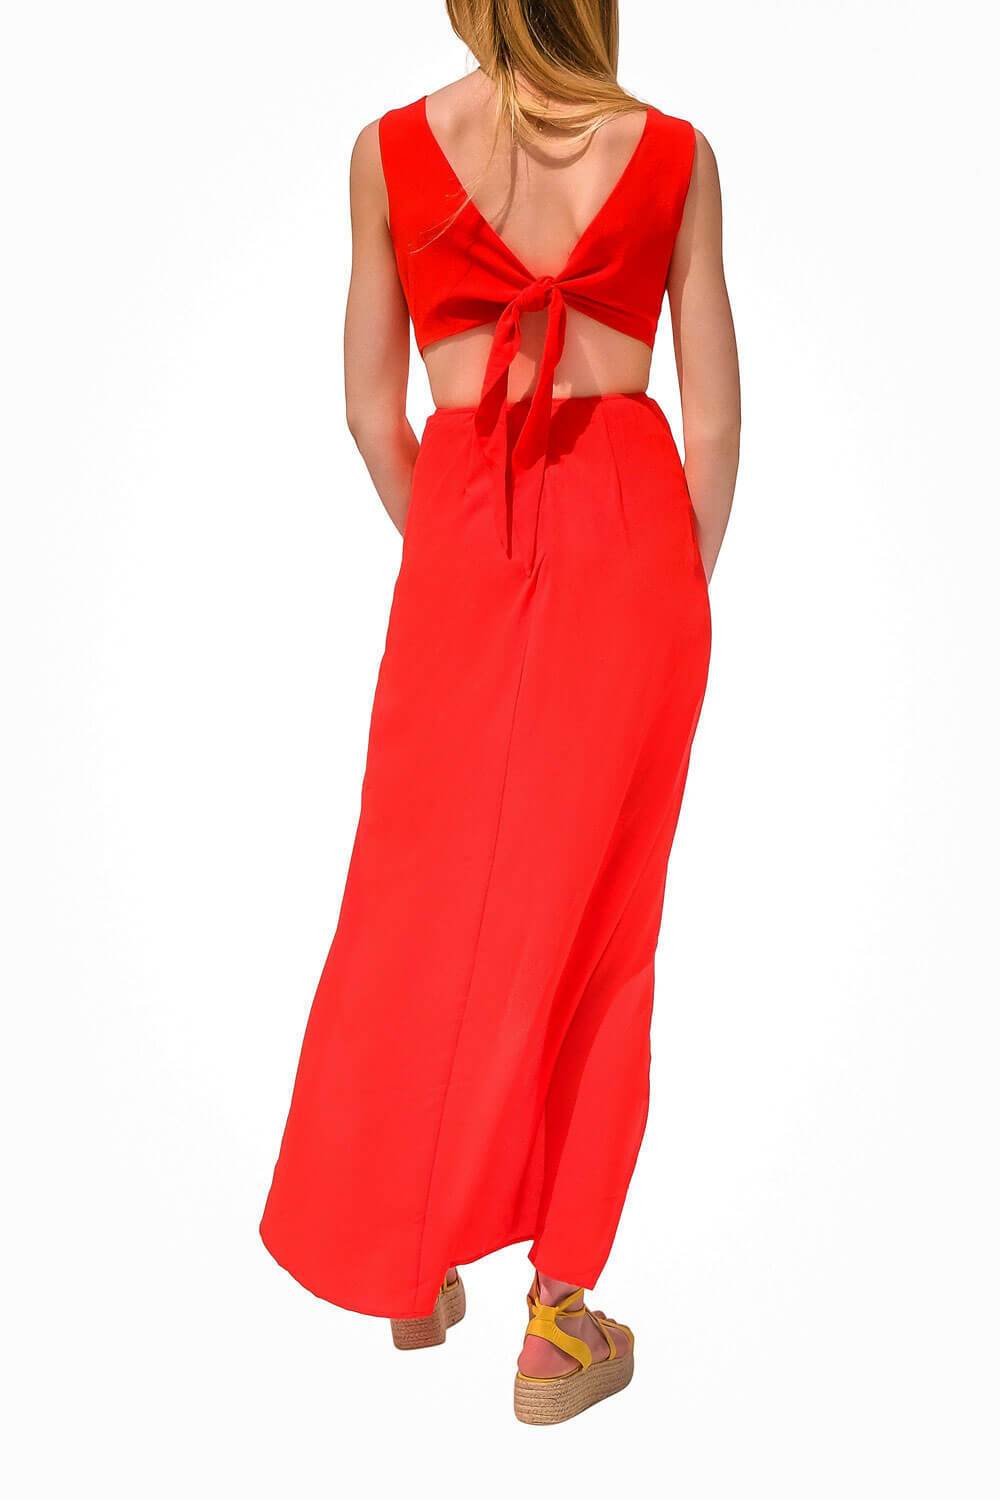 Night Out Cut Out Dress Red Back - MILK MONEY